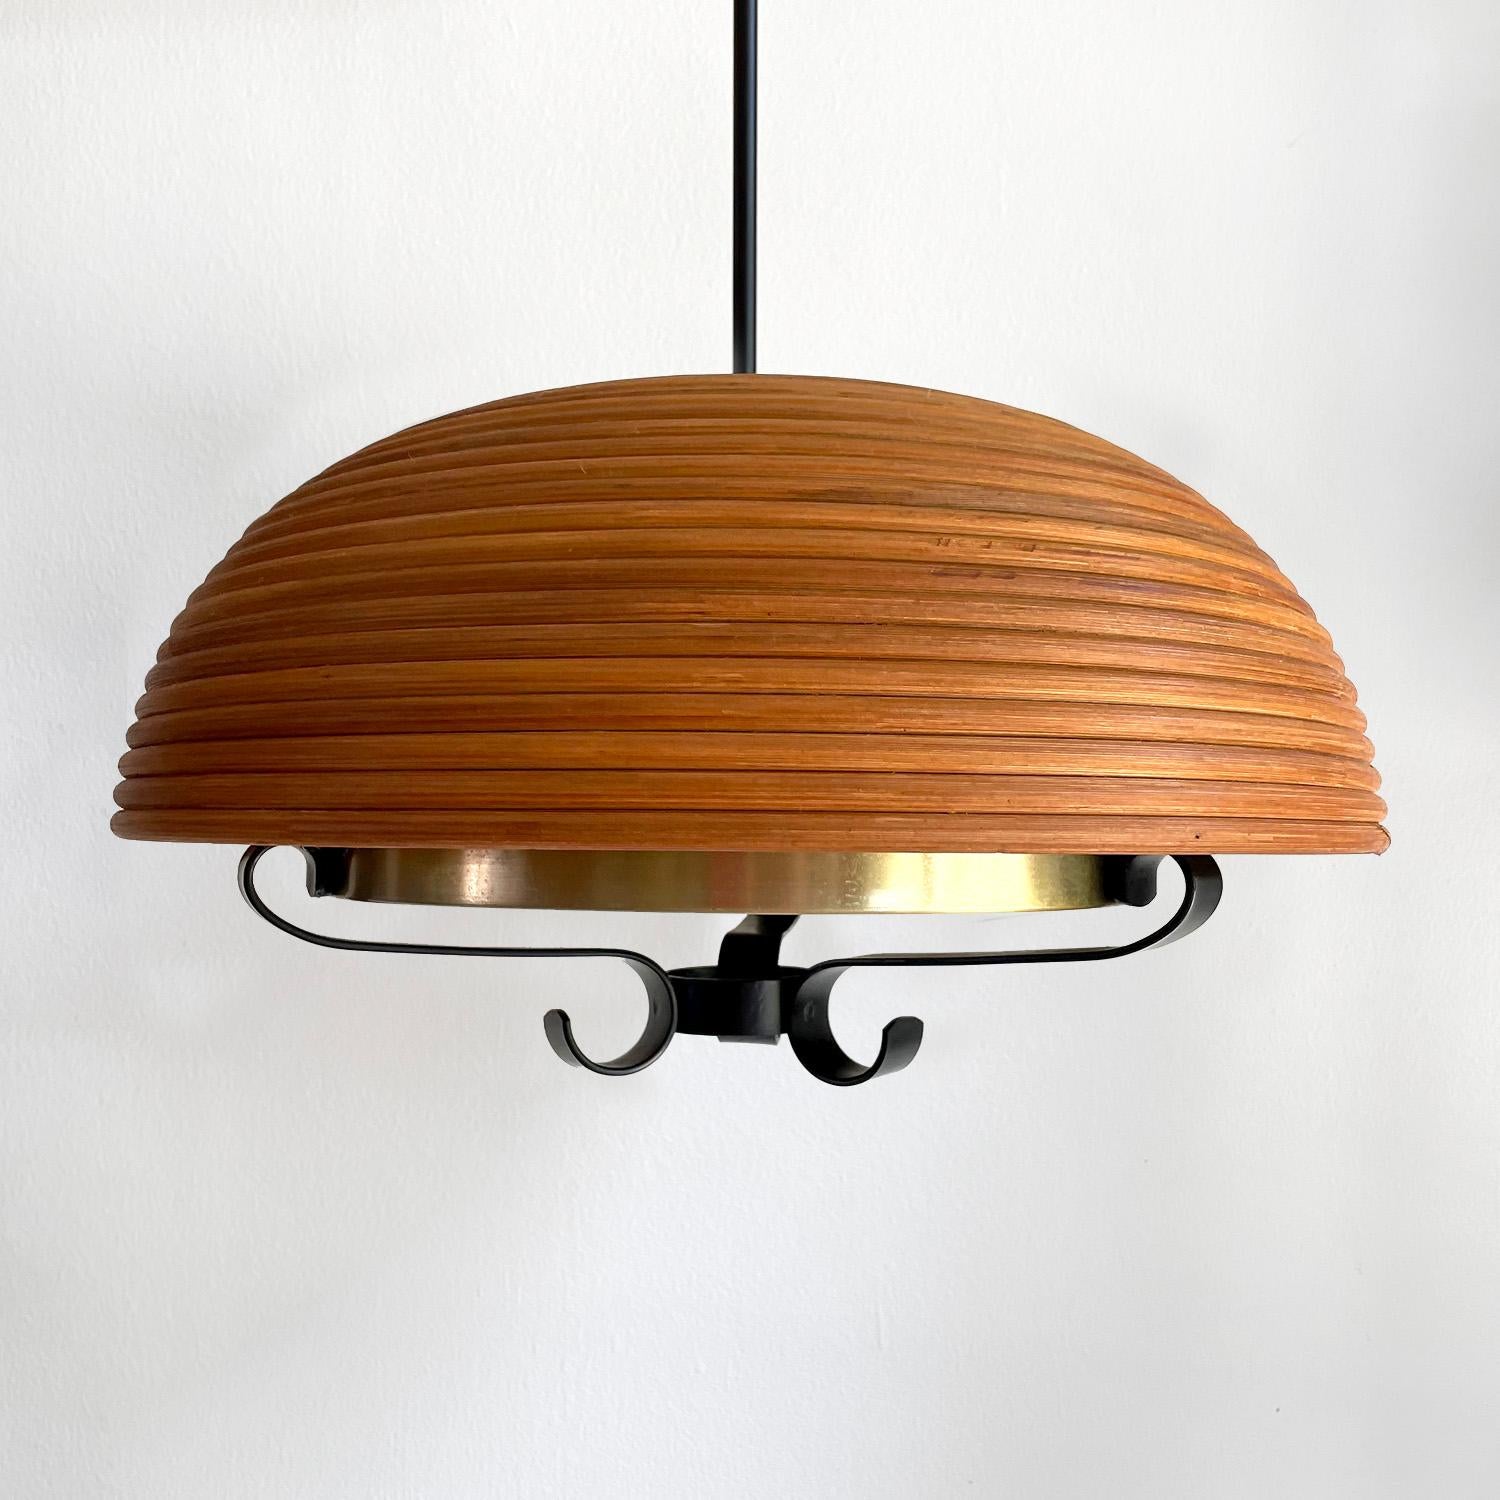 Italian rattan dome pendant light
Italy, circa 1960's
Original rattan dome
Wrought iron frame
Interior textured glass diffuser shade
Patina from age and use
Light surface markings to the top of the iron frame, please reference photos
Newly